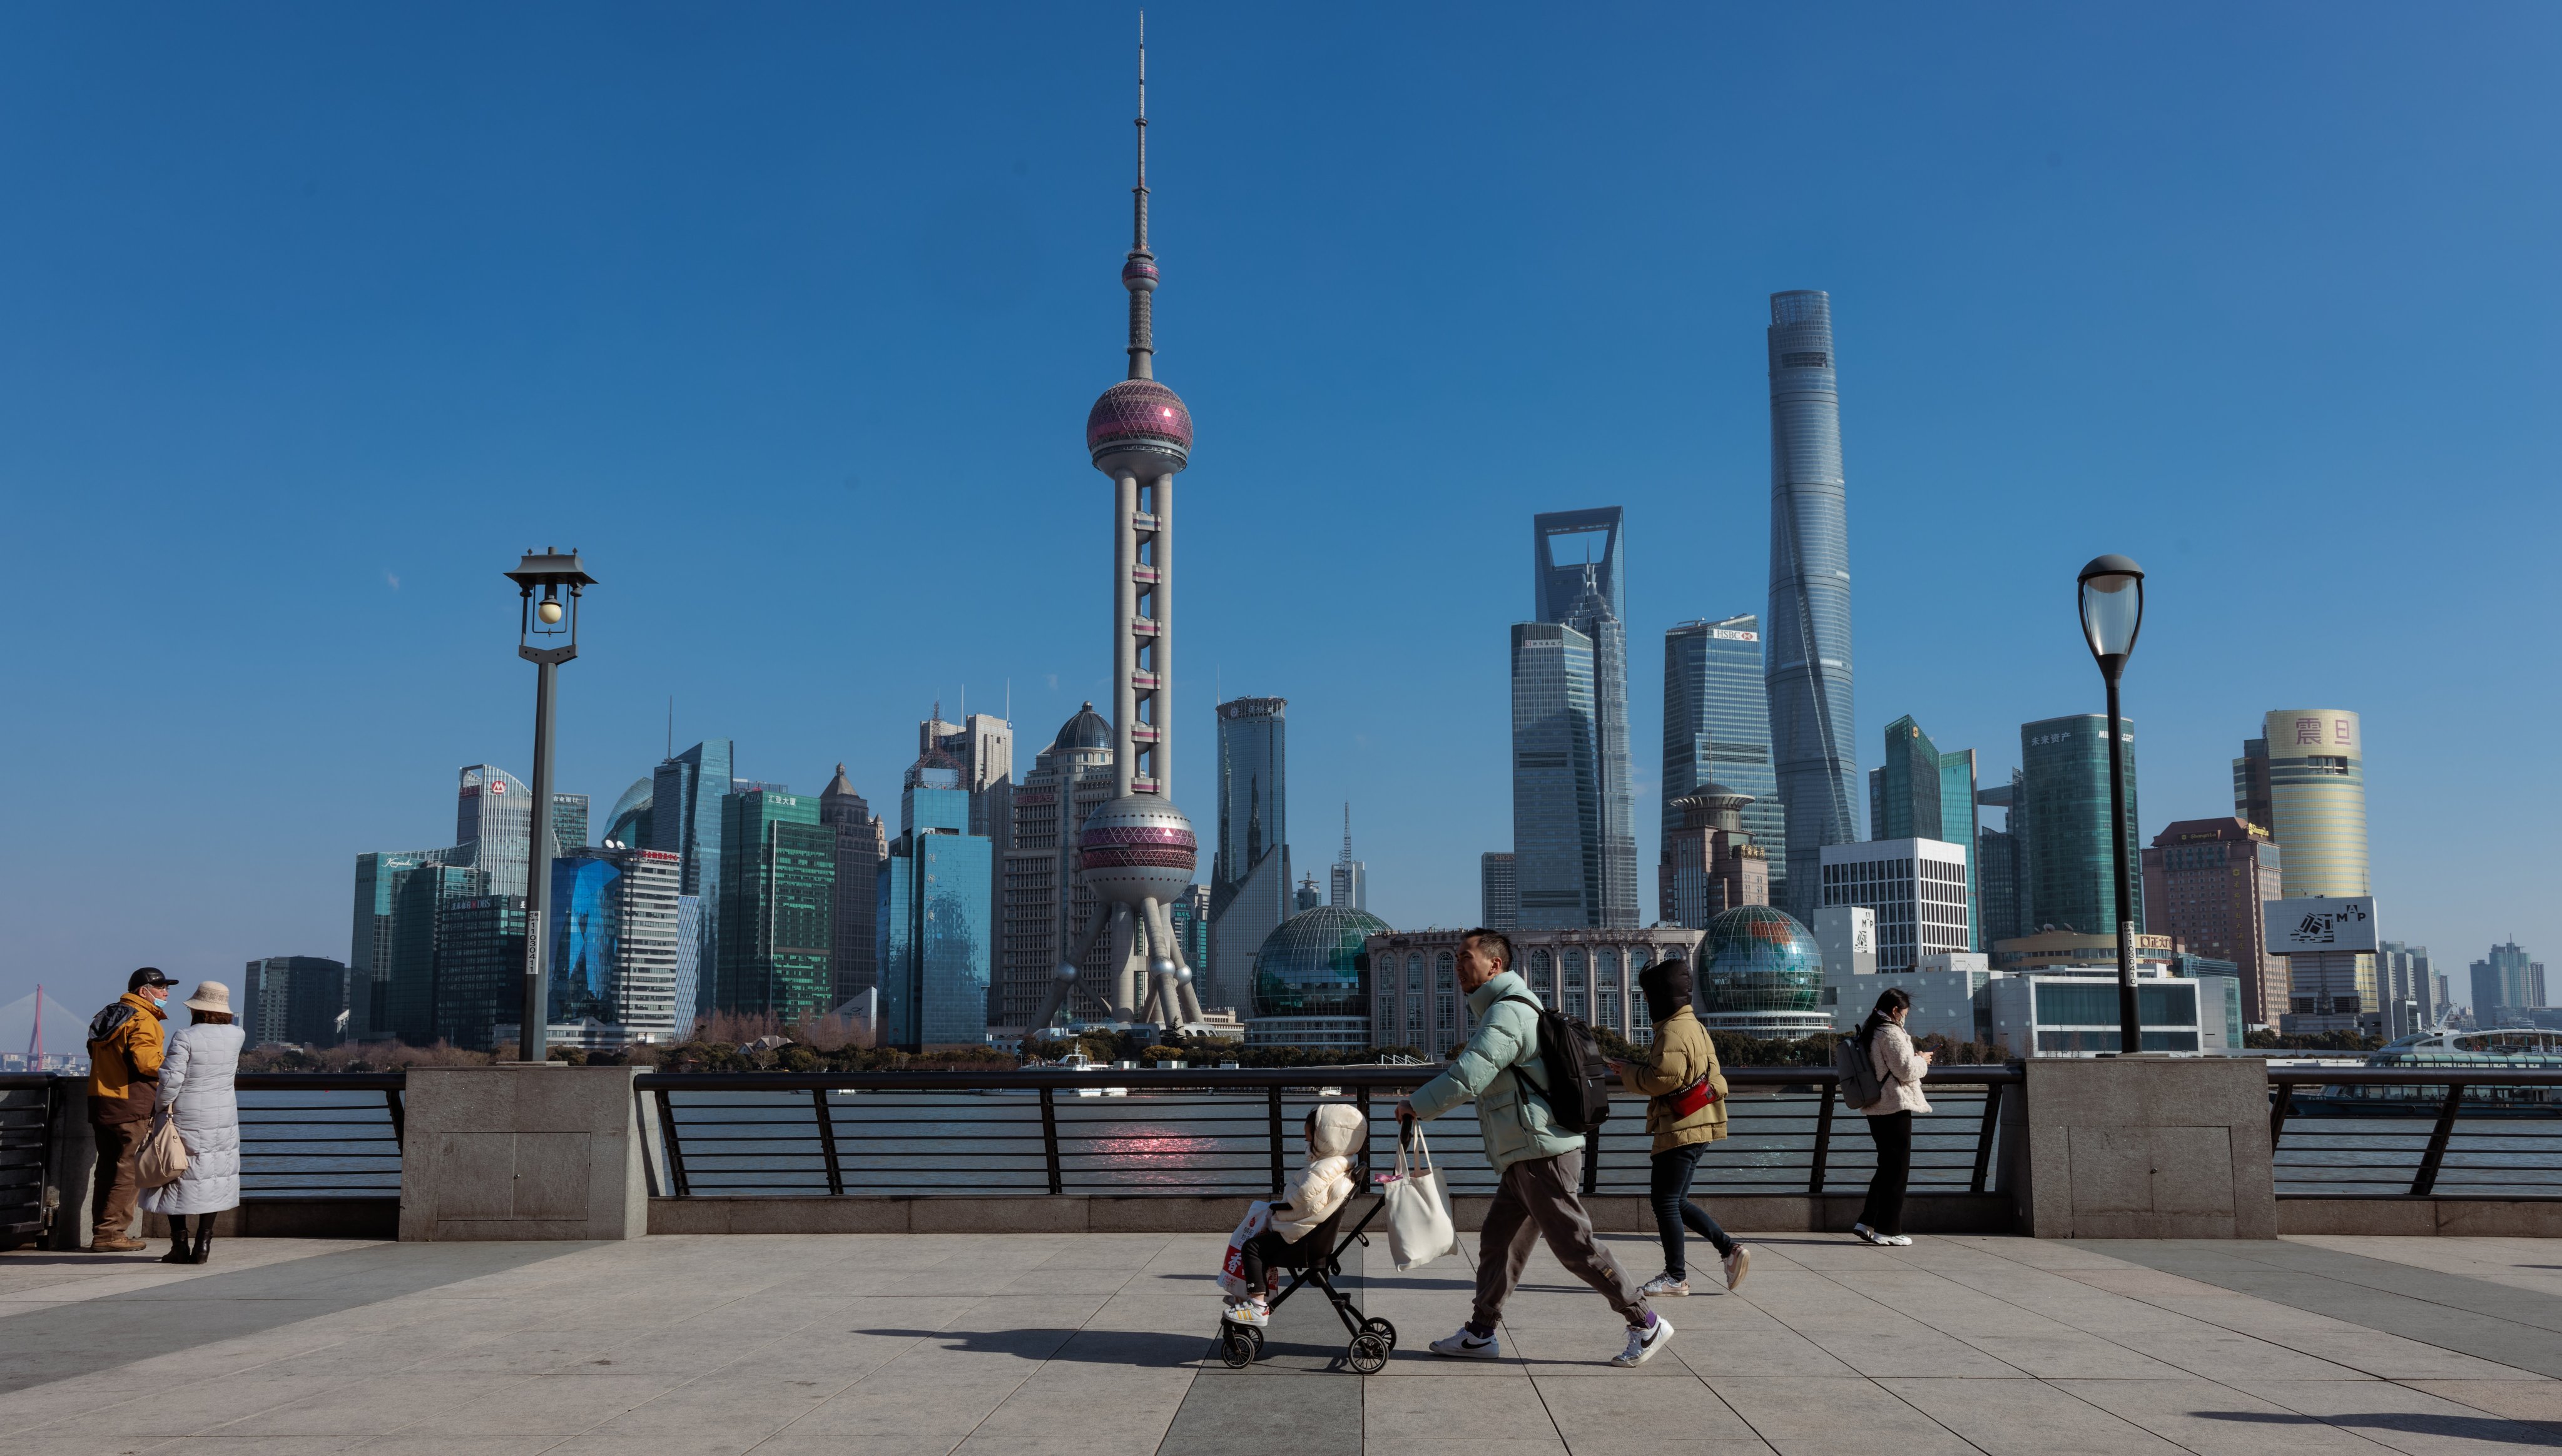 People stroll along the Bund, in Shanghai, China, on January 27. In recent decades, China’s ability to coordinate large-scale economic activity has steadily increased. Photo: EPA-EFE